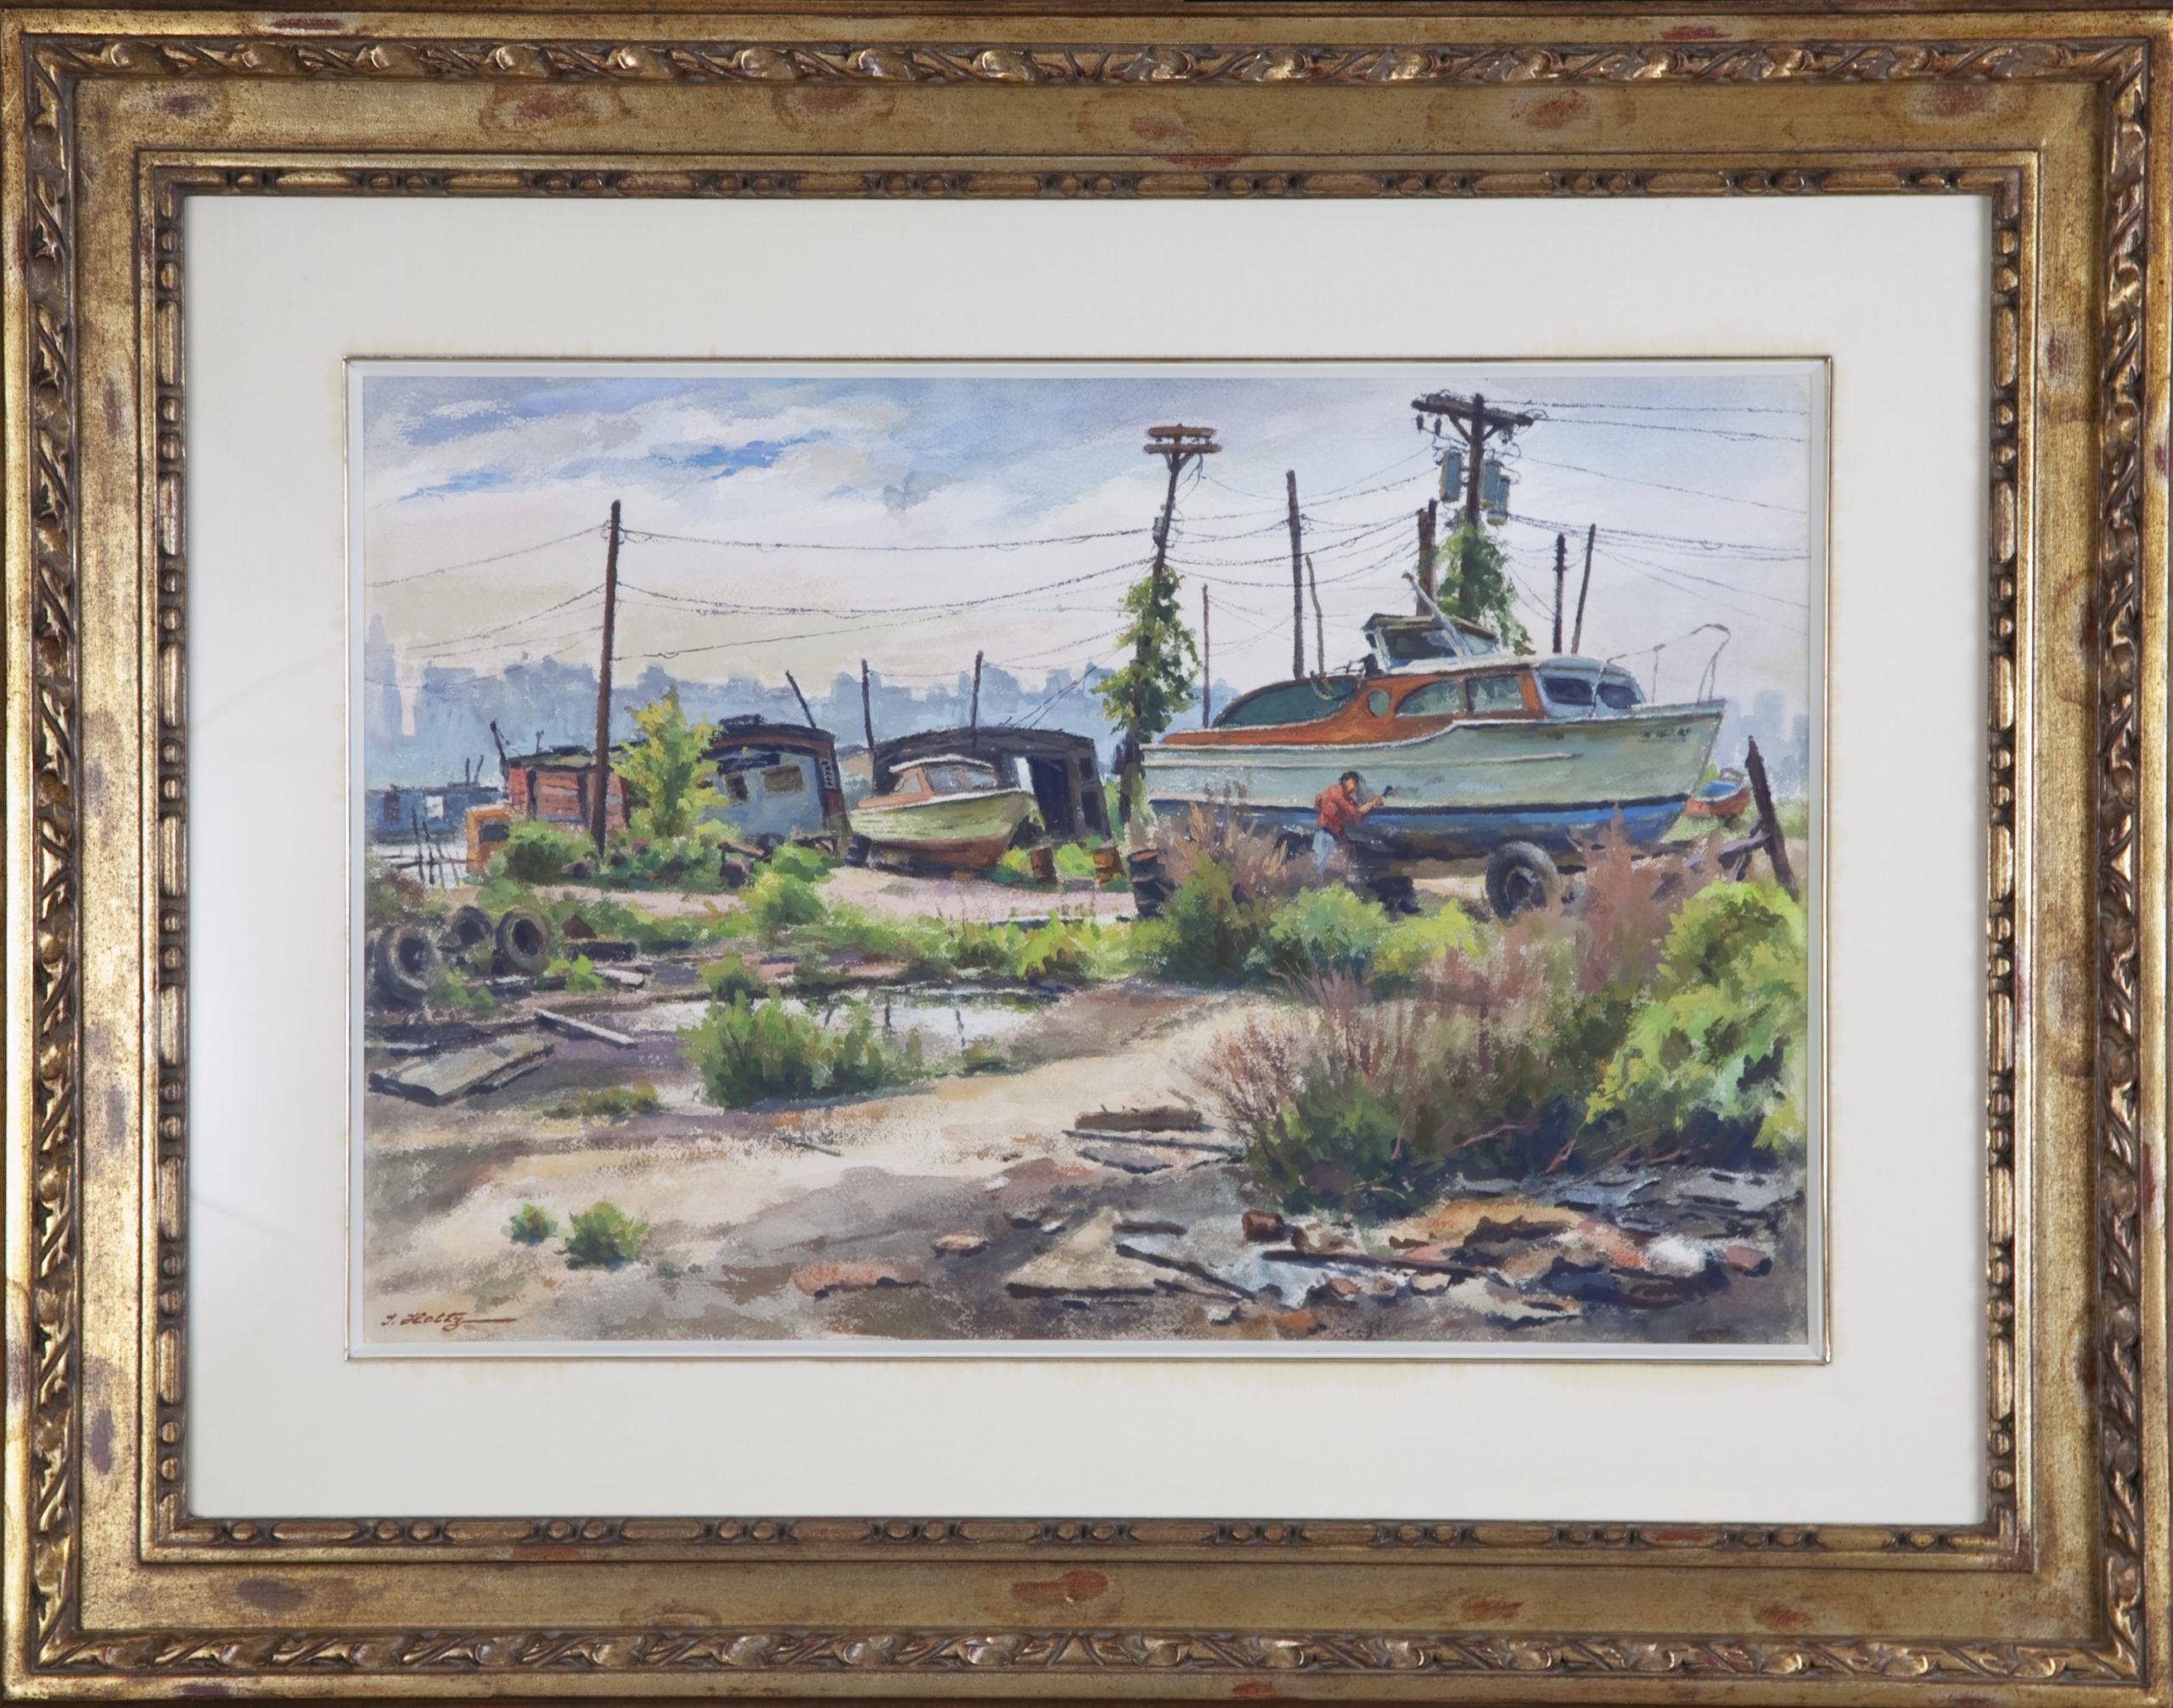 182 In Dry Dock 1975 - Watercolor - 22 x 15 - Frame: 33 x 25.75 x 1.5